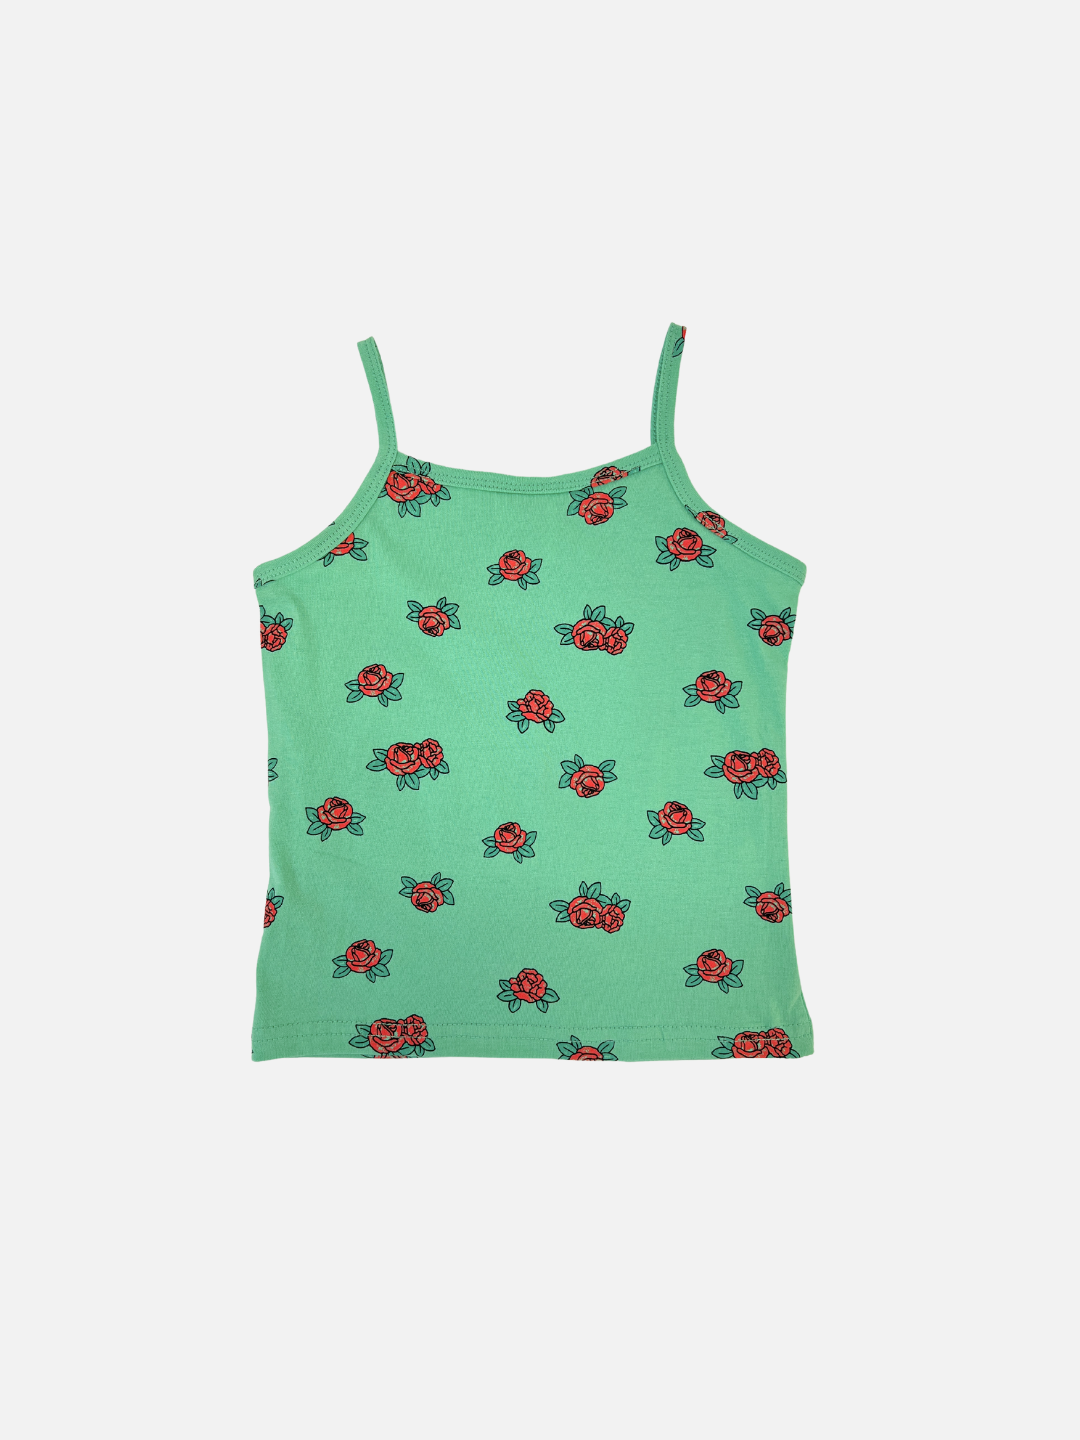 Back view of the kid's roses tank top in Green with red roses all-over print